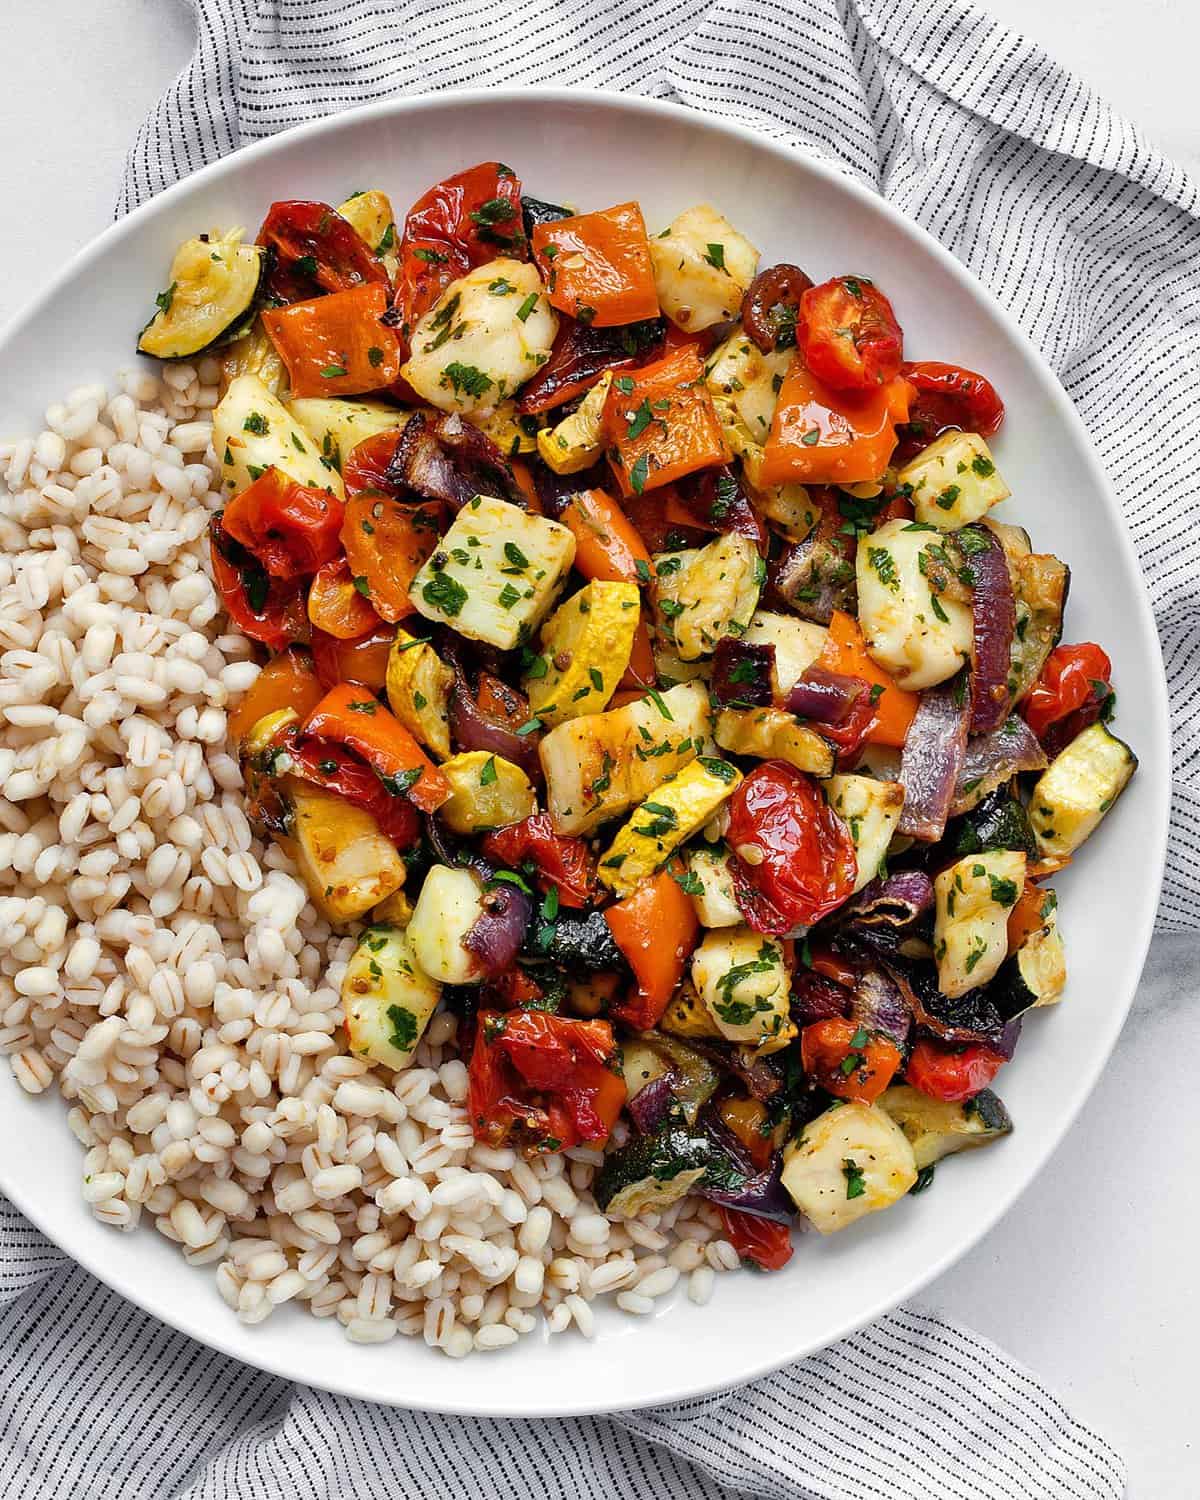 Roasted Mediterranean Vegetables and Halloumi with Barley